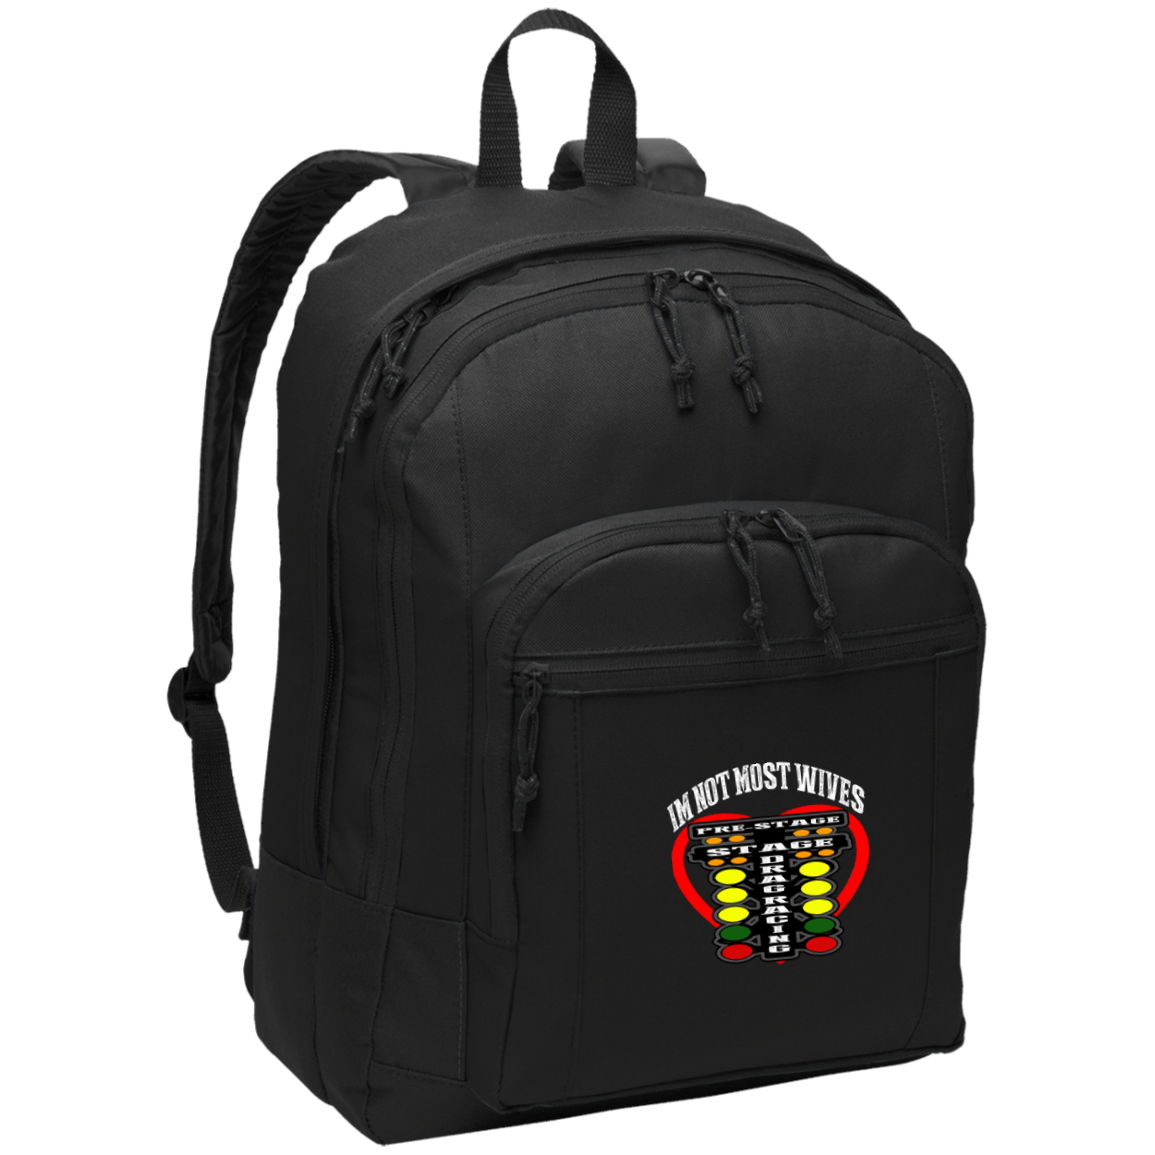 I'm Not Most Wives Drag Racing Basic Backpack